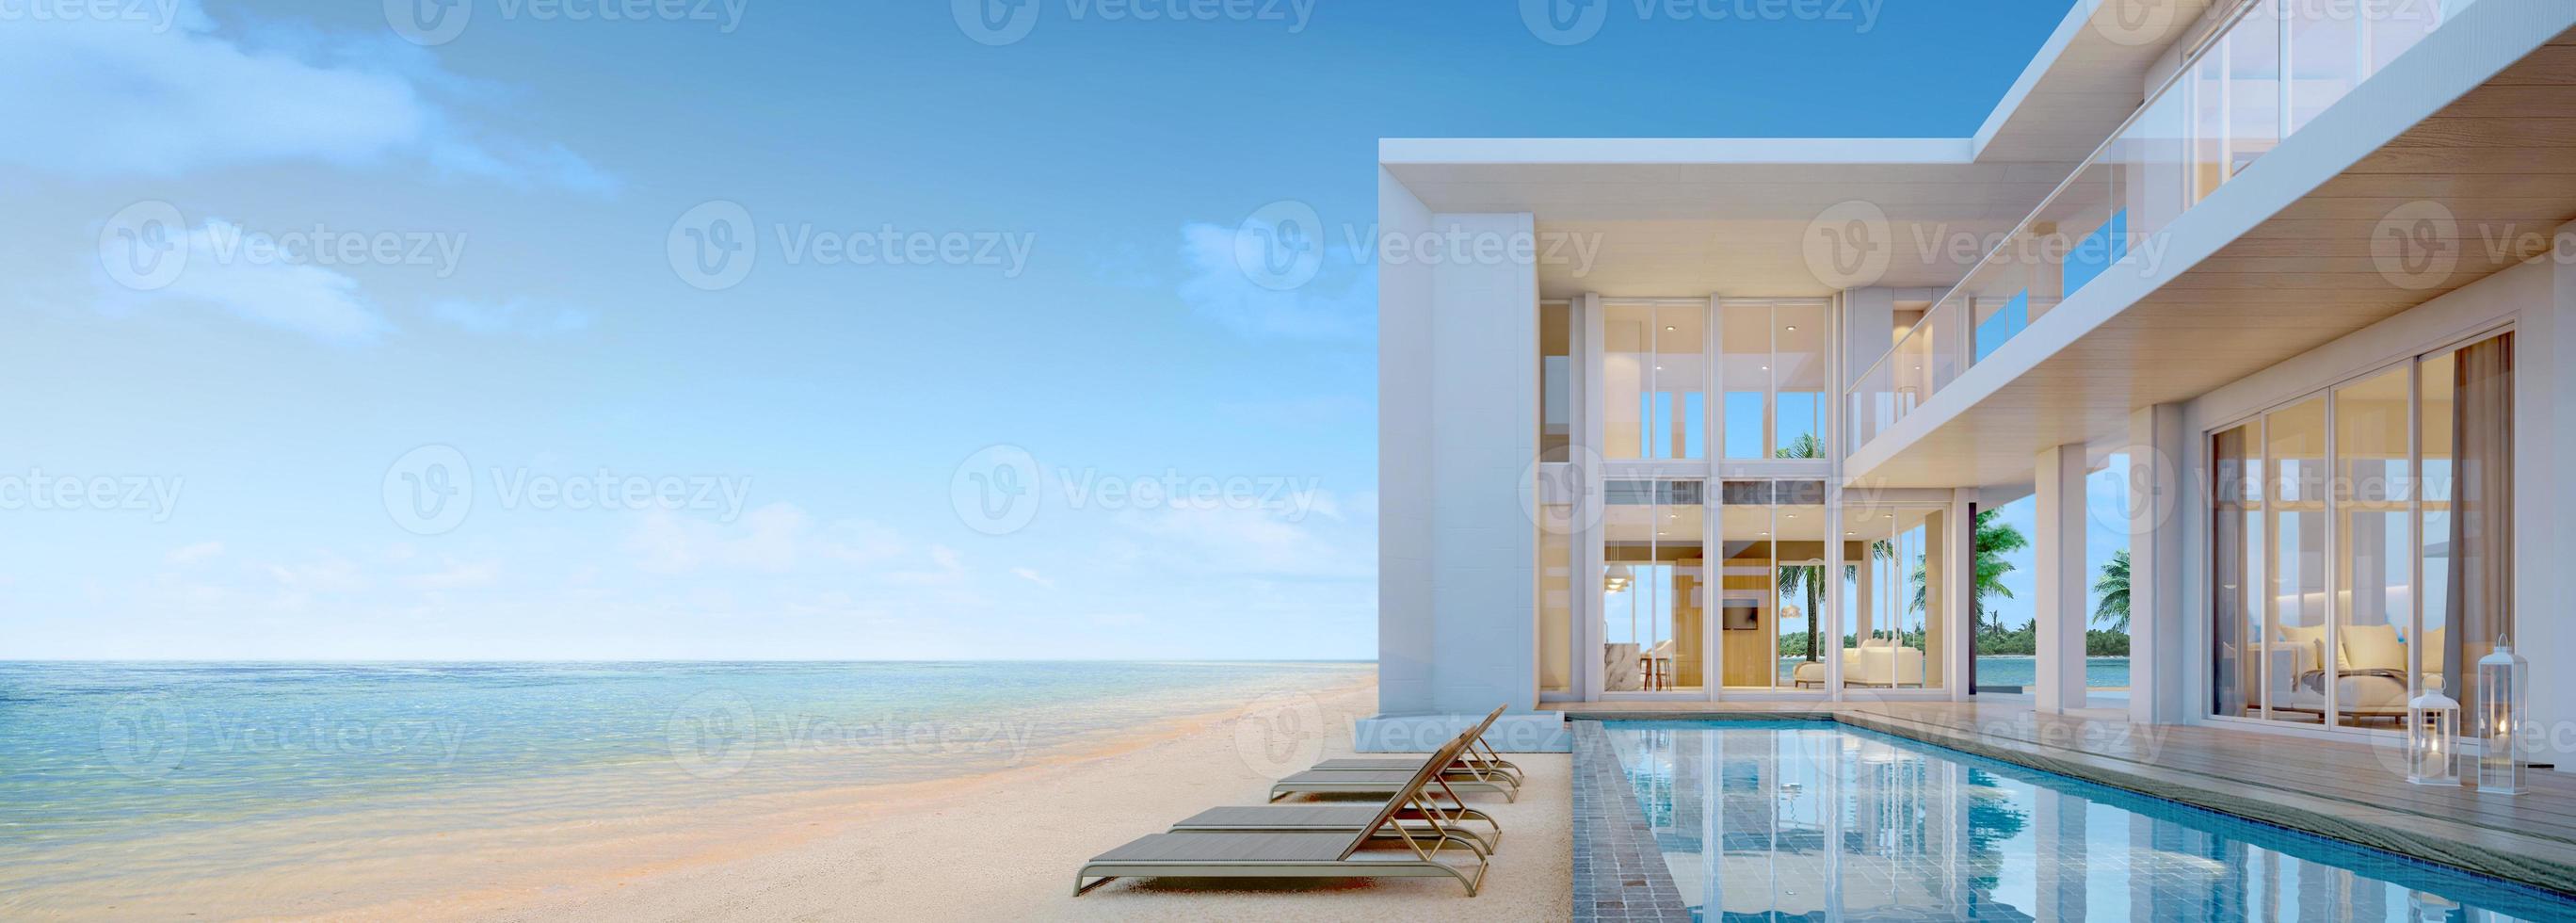 Sea view.Luxury modern beach house with swimming pool and sunbed  for vacation home or hotel.3d rendering photo